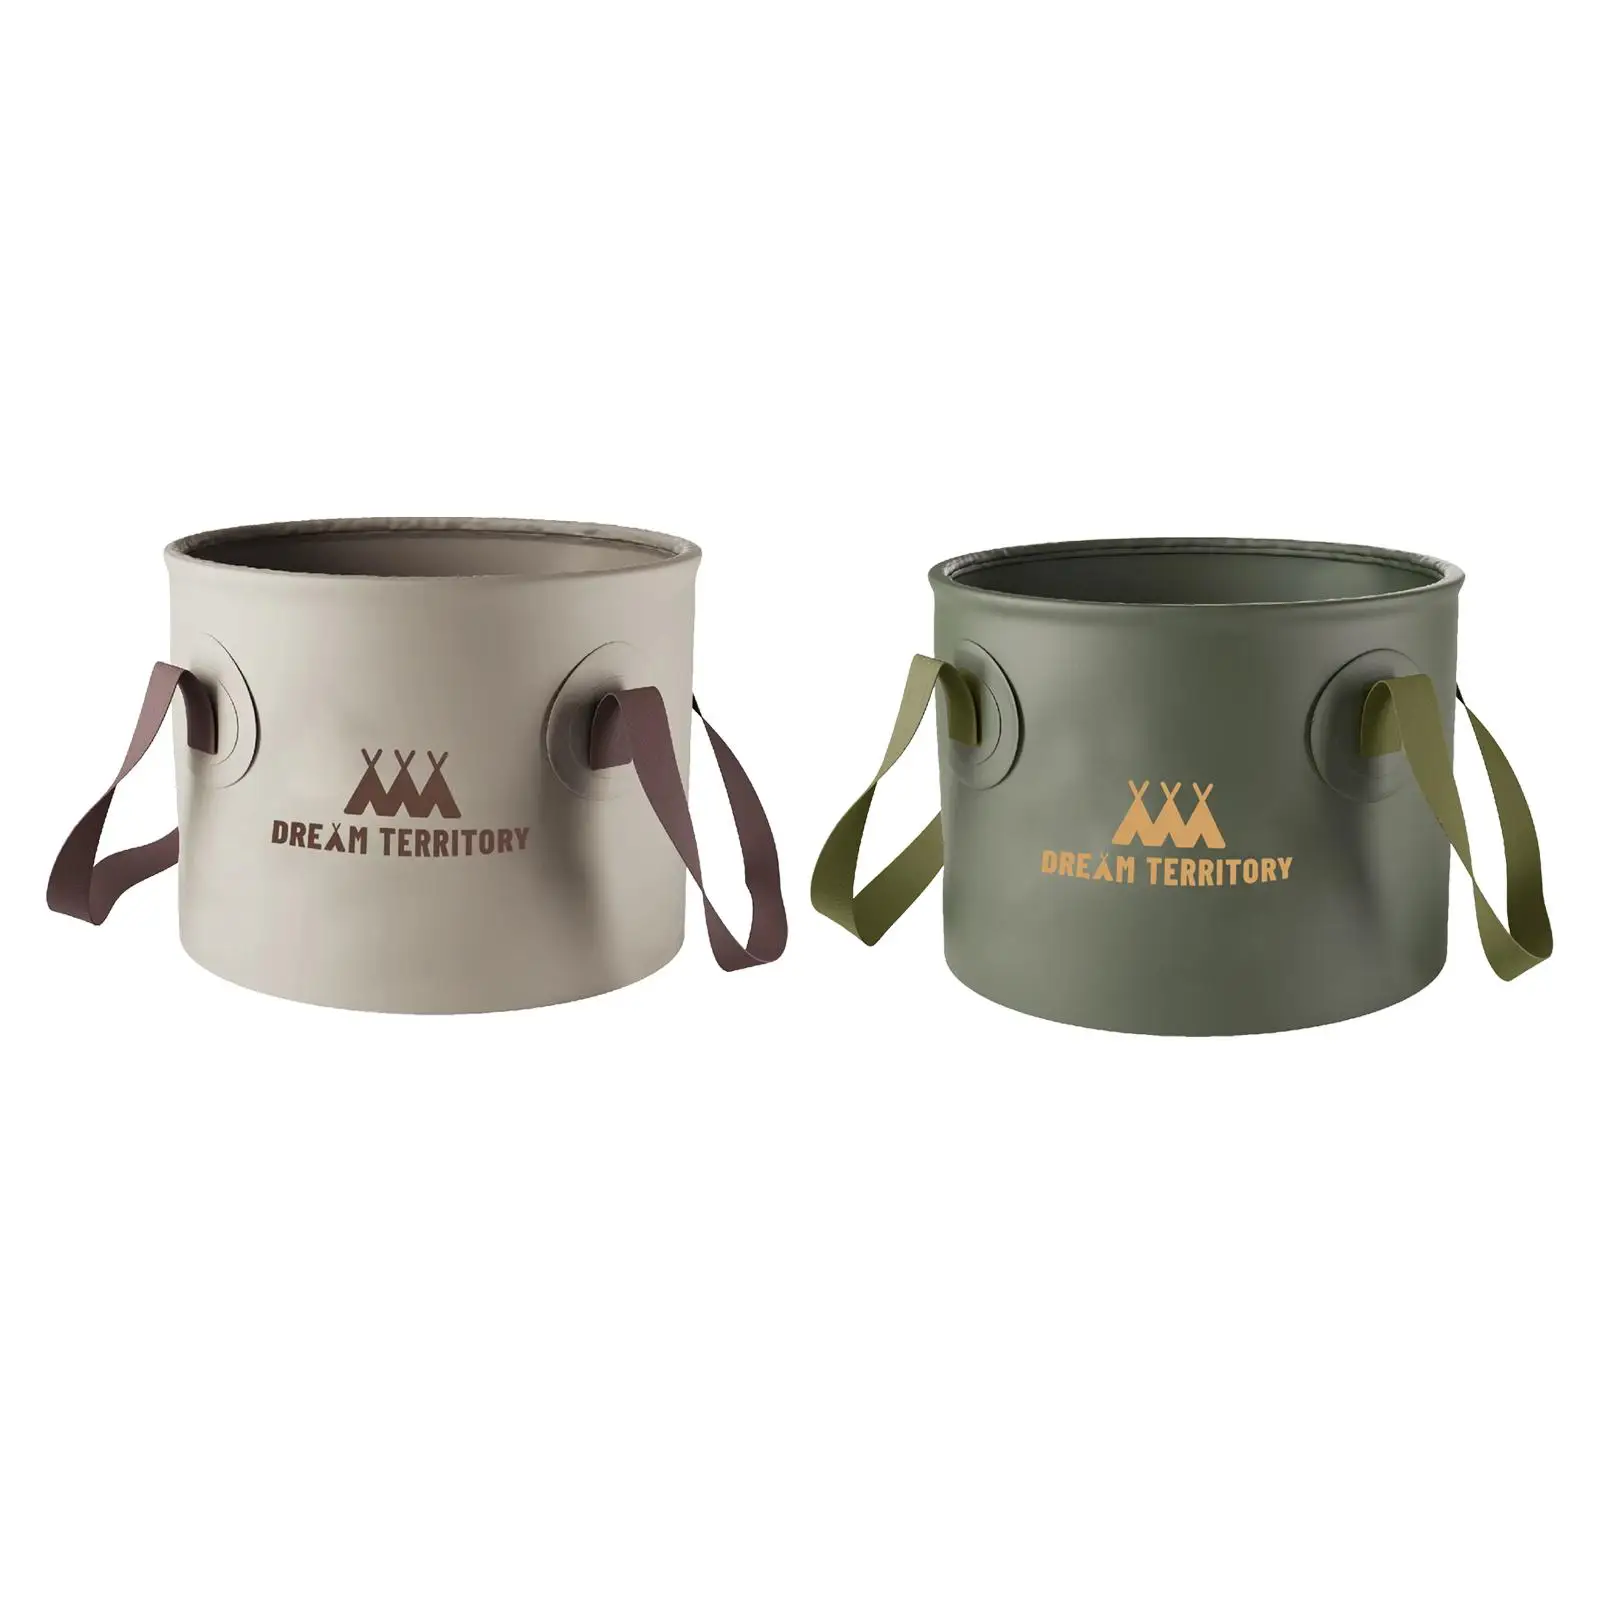 Collapsible Bucket Folding Water Bucket Camping Bucket with Handle Water Storage Container for Camping Travelling Hiking Fishing